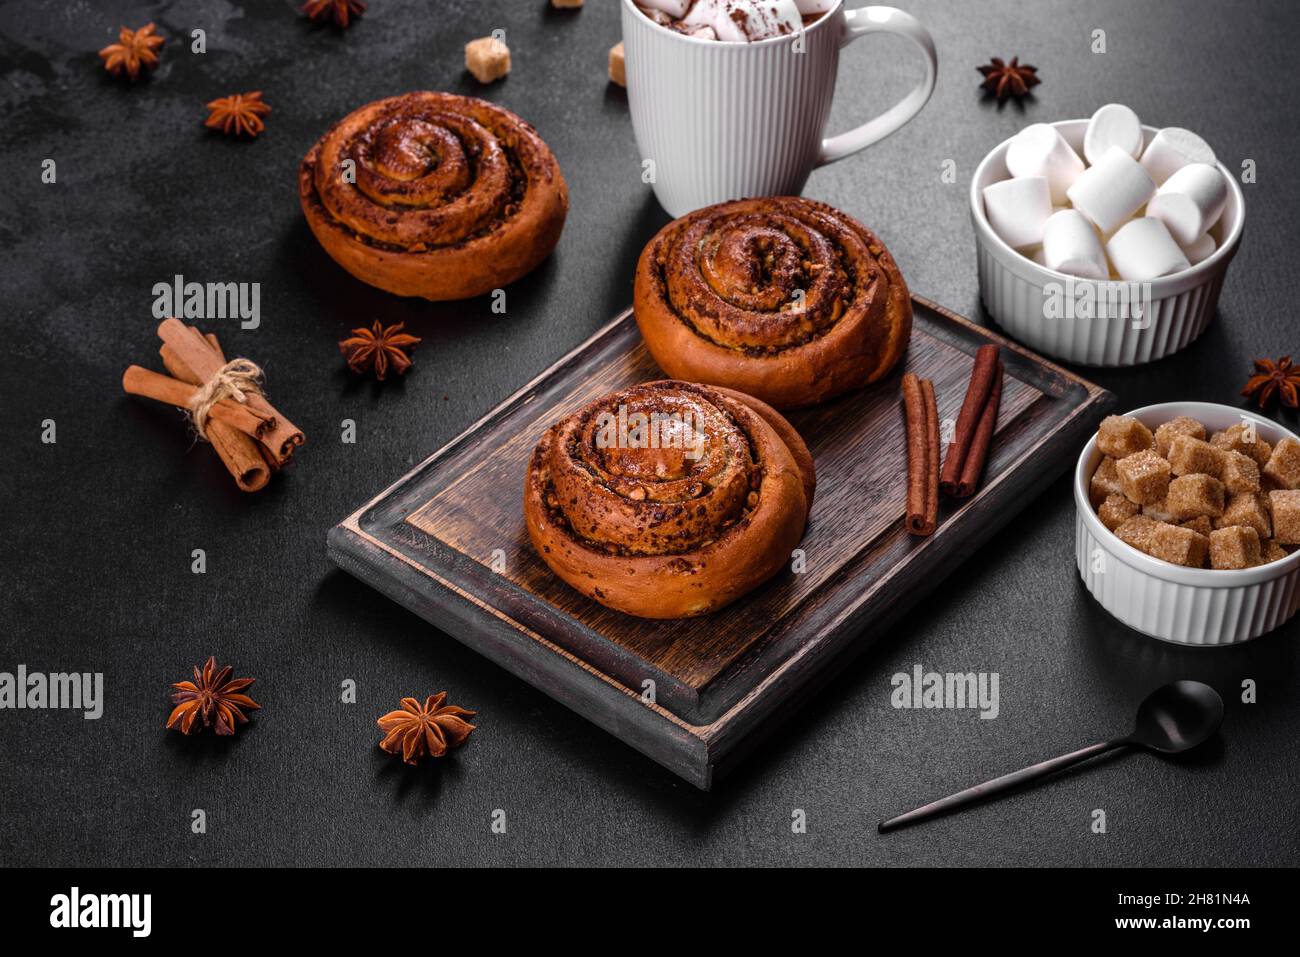 Freshly baked cinnamon roll with spices and cocoa filling on a black background. Cinnabon buns. Swedish breakfast. Stock Photo